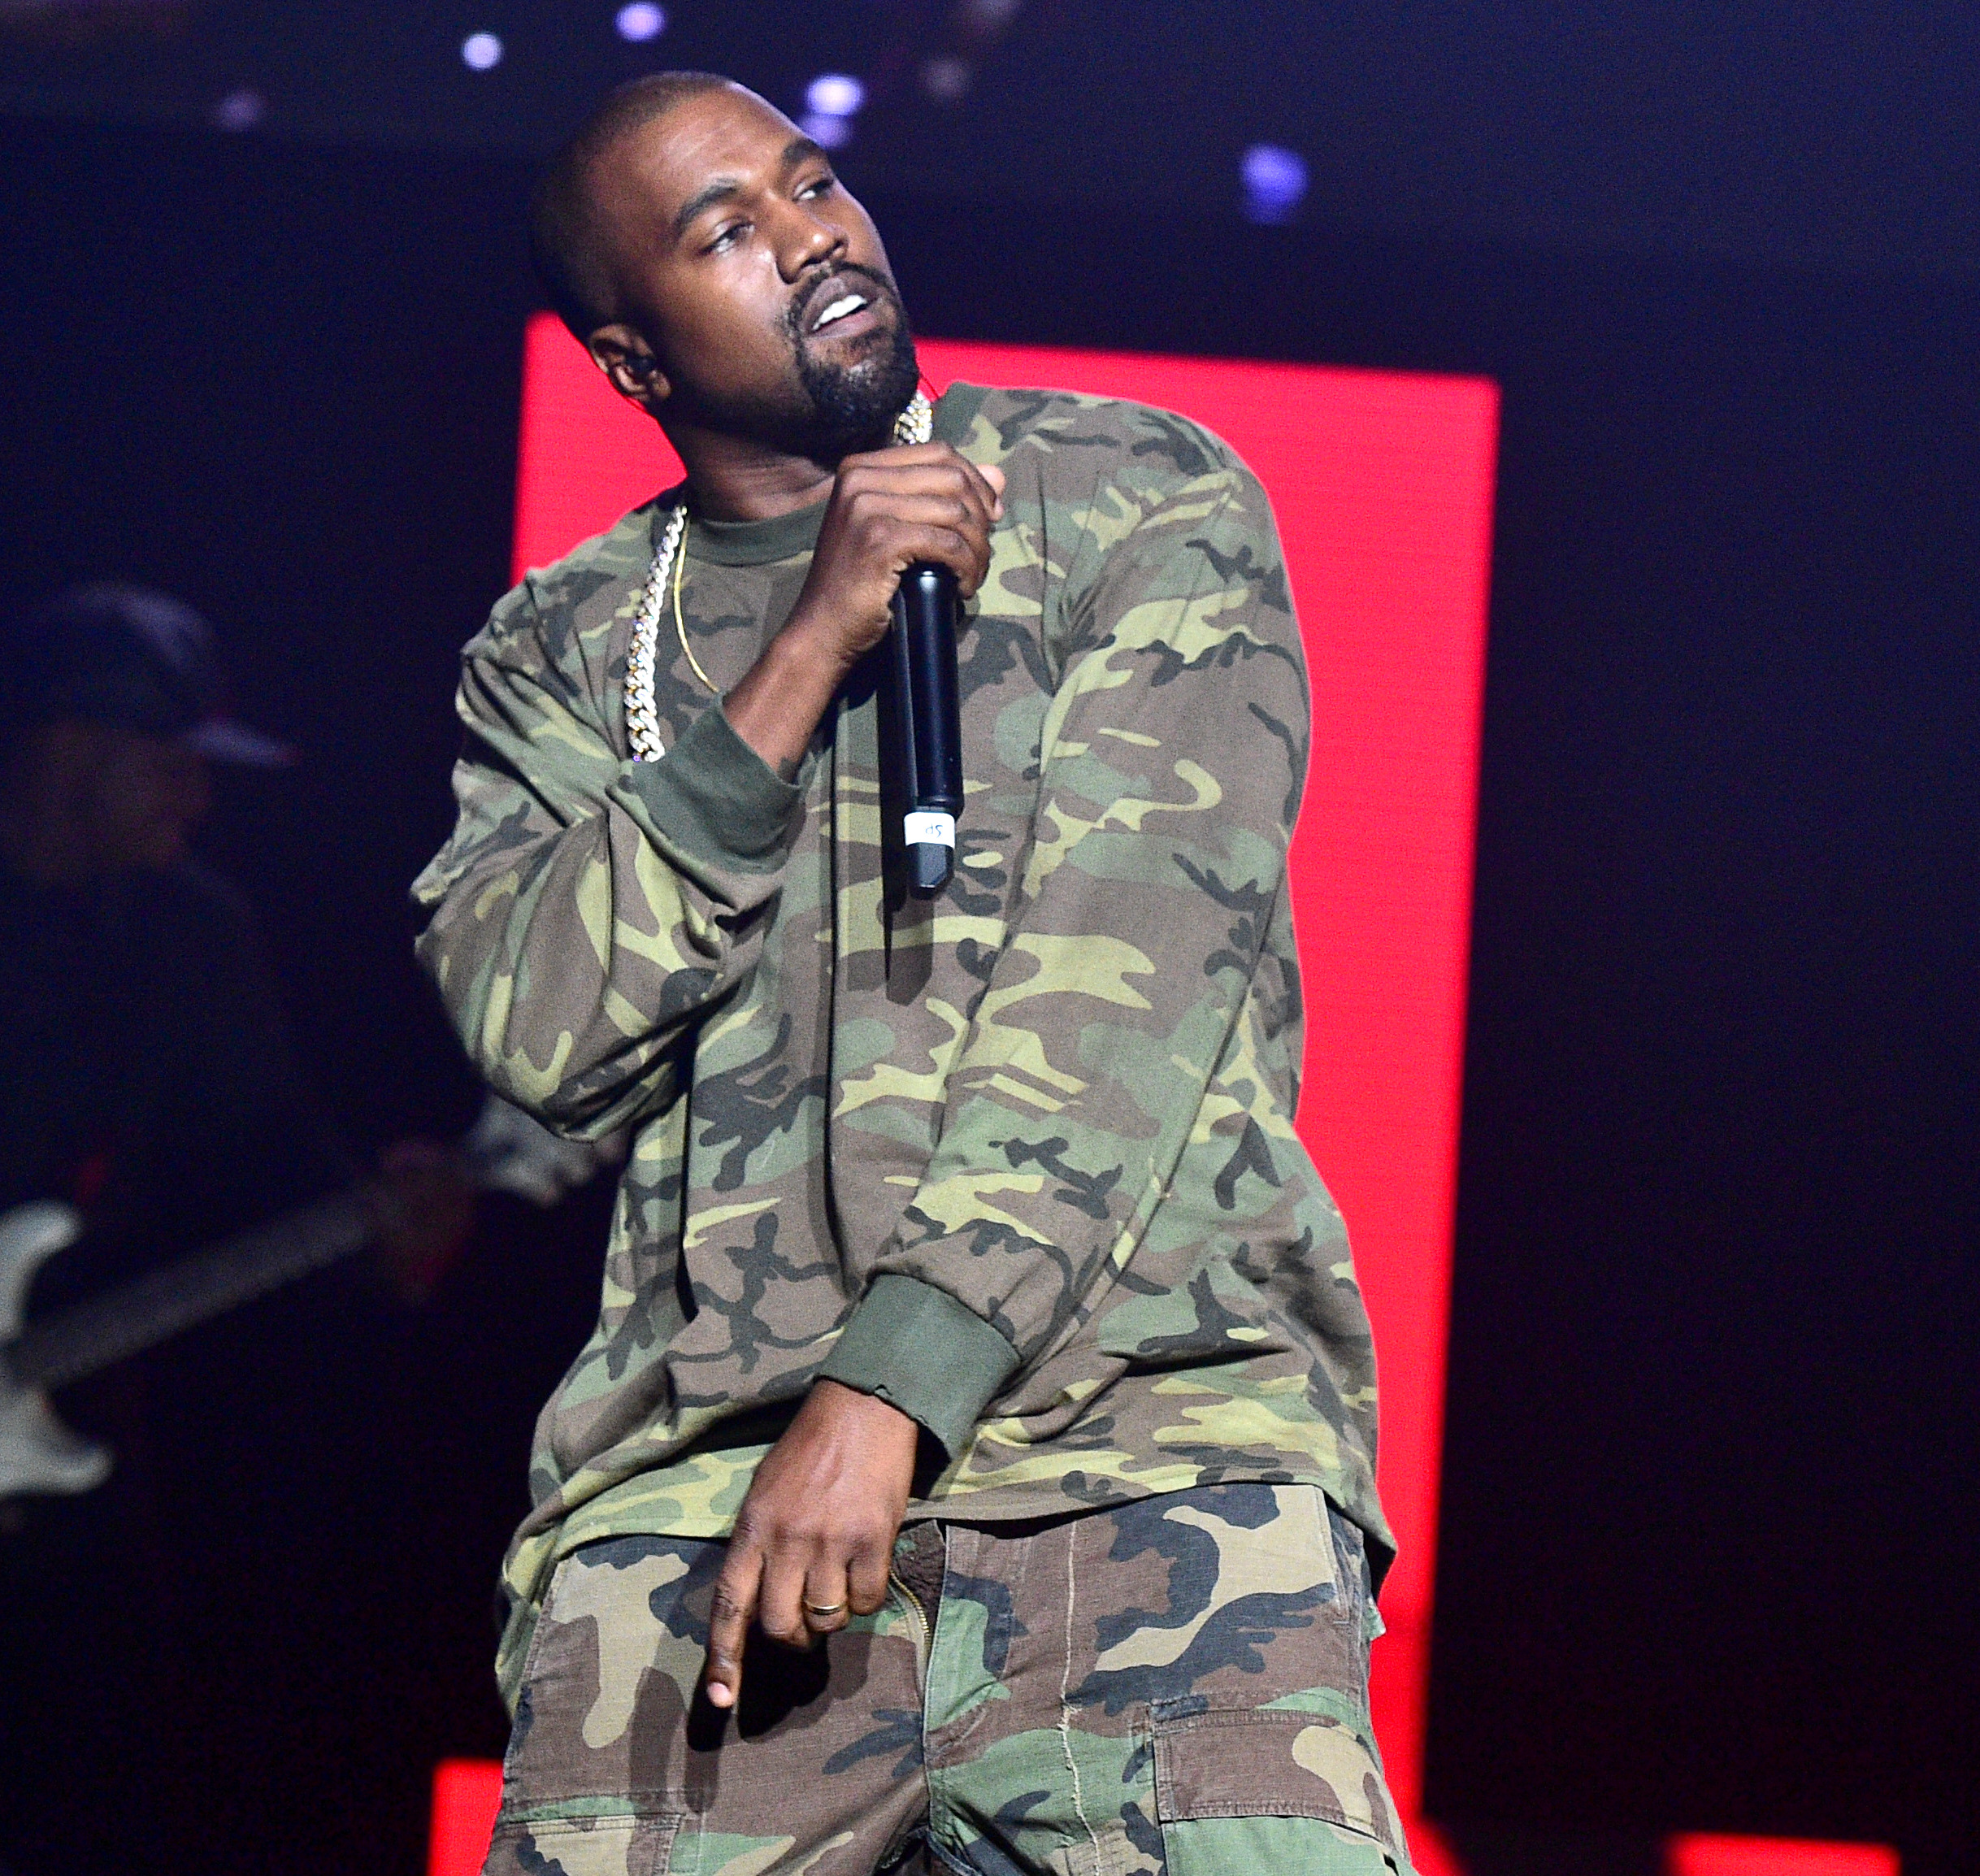 Kanye pictured performing onstage back in July 2015